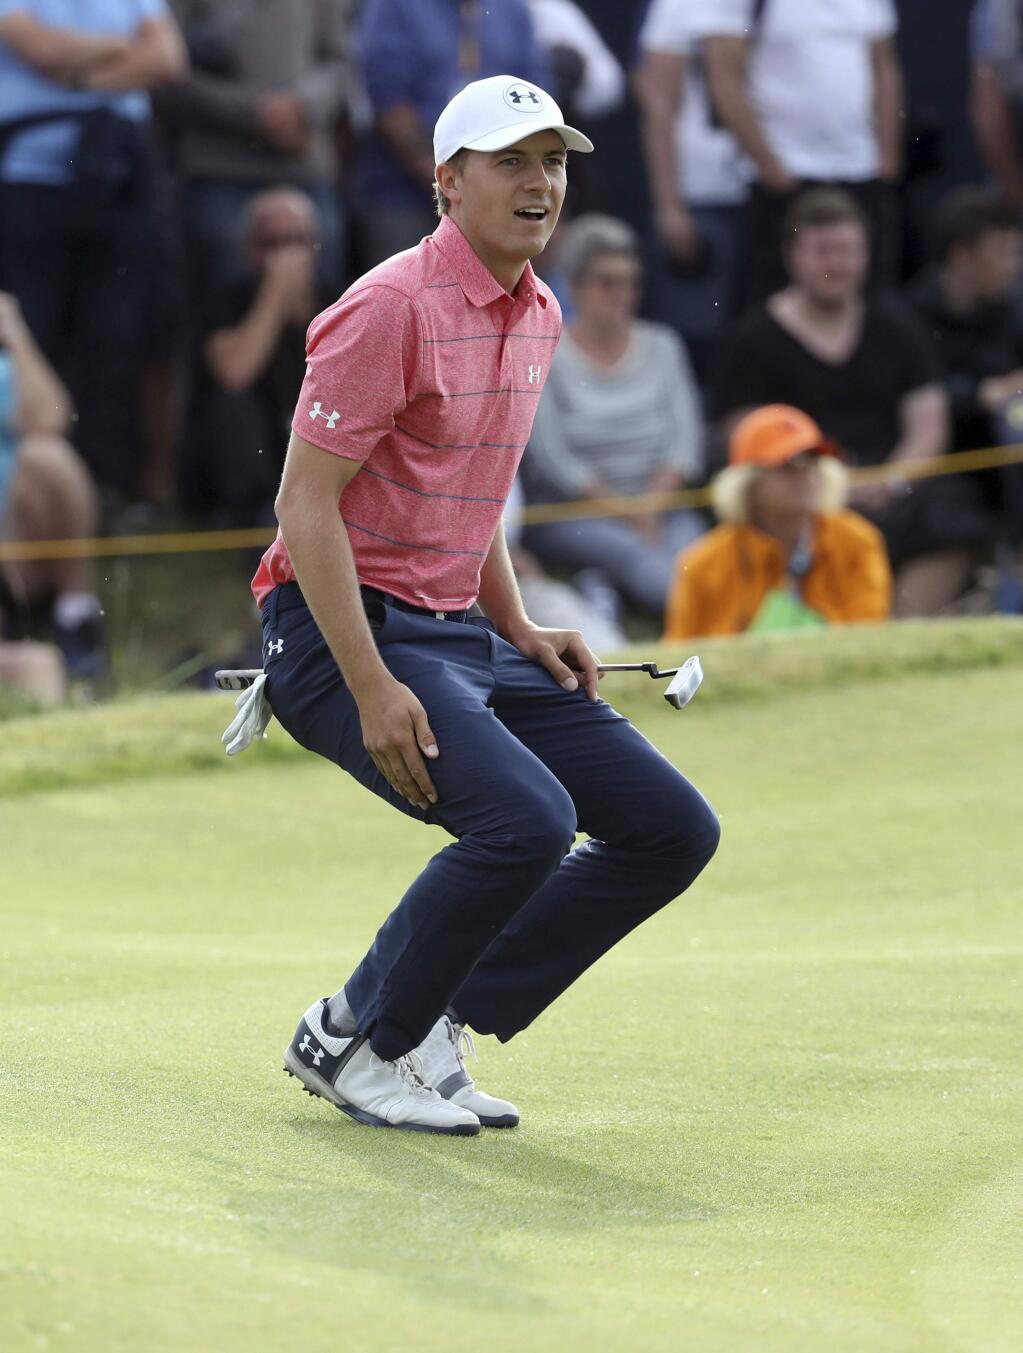 Jordan Spieth of the United States watches his putt on the 15th green during the third round of the British Open Golf Championship, at Royal Birkdale, Southport, England, Saturday July 22, 2017. (AP Photo/Peter Morrison)